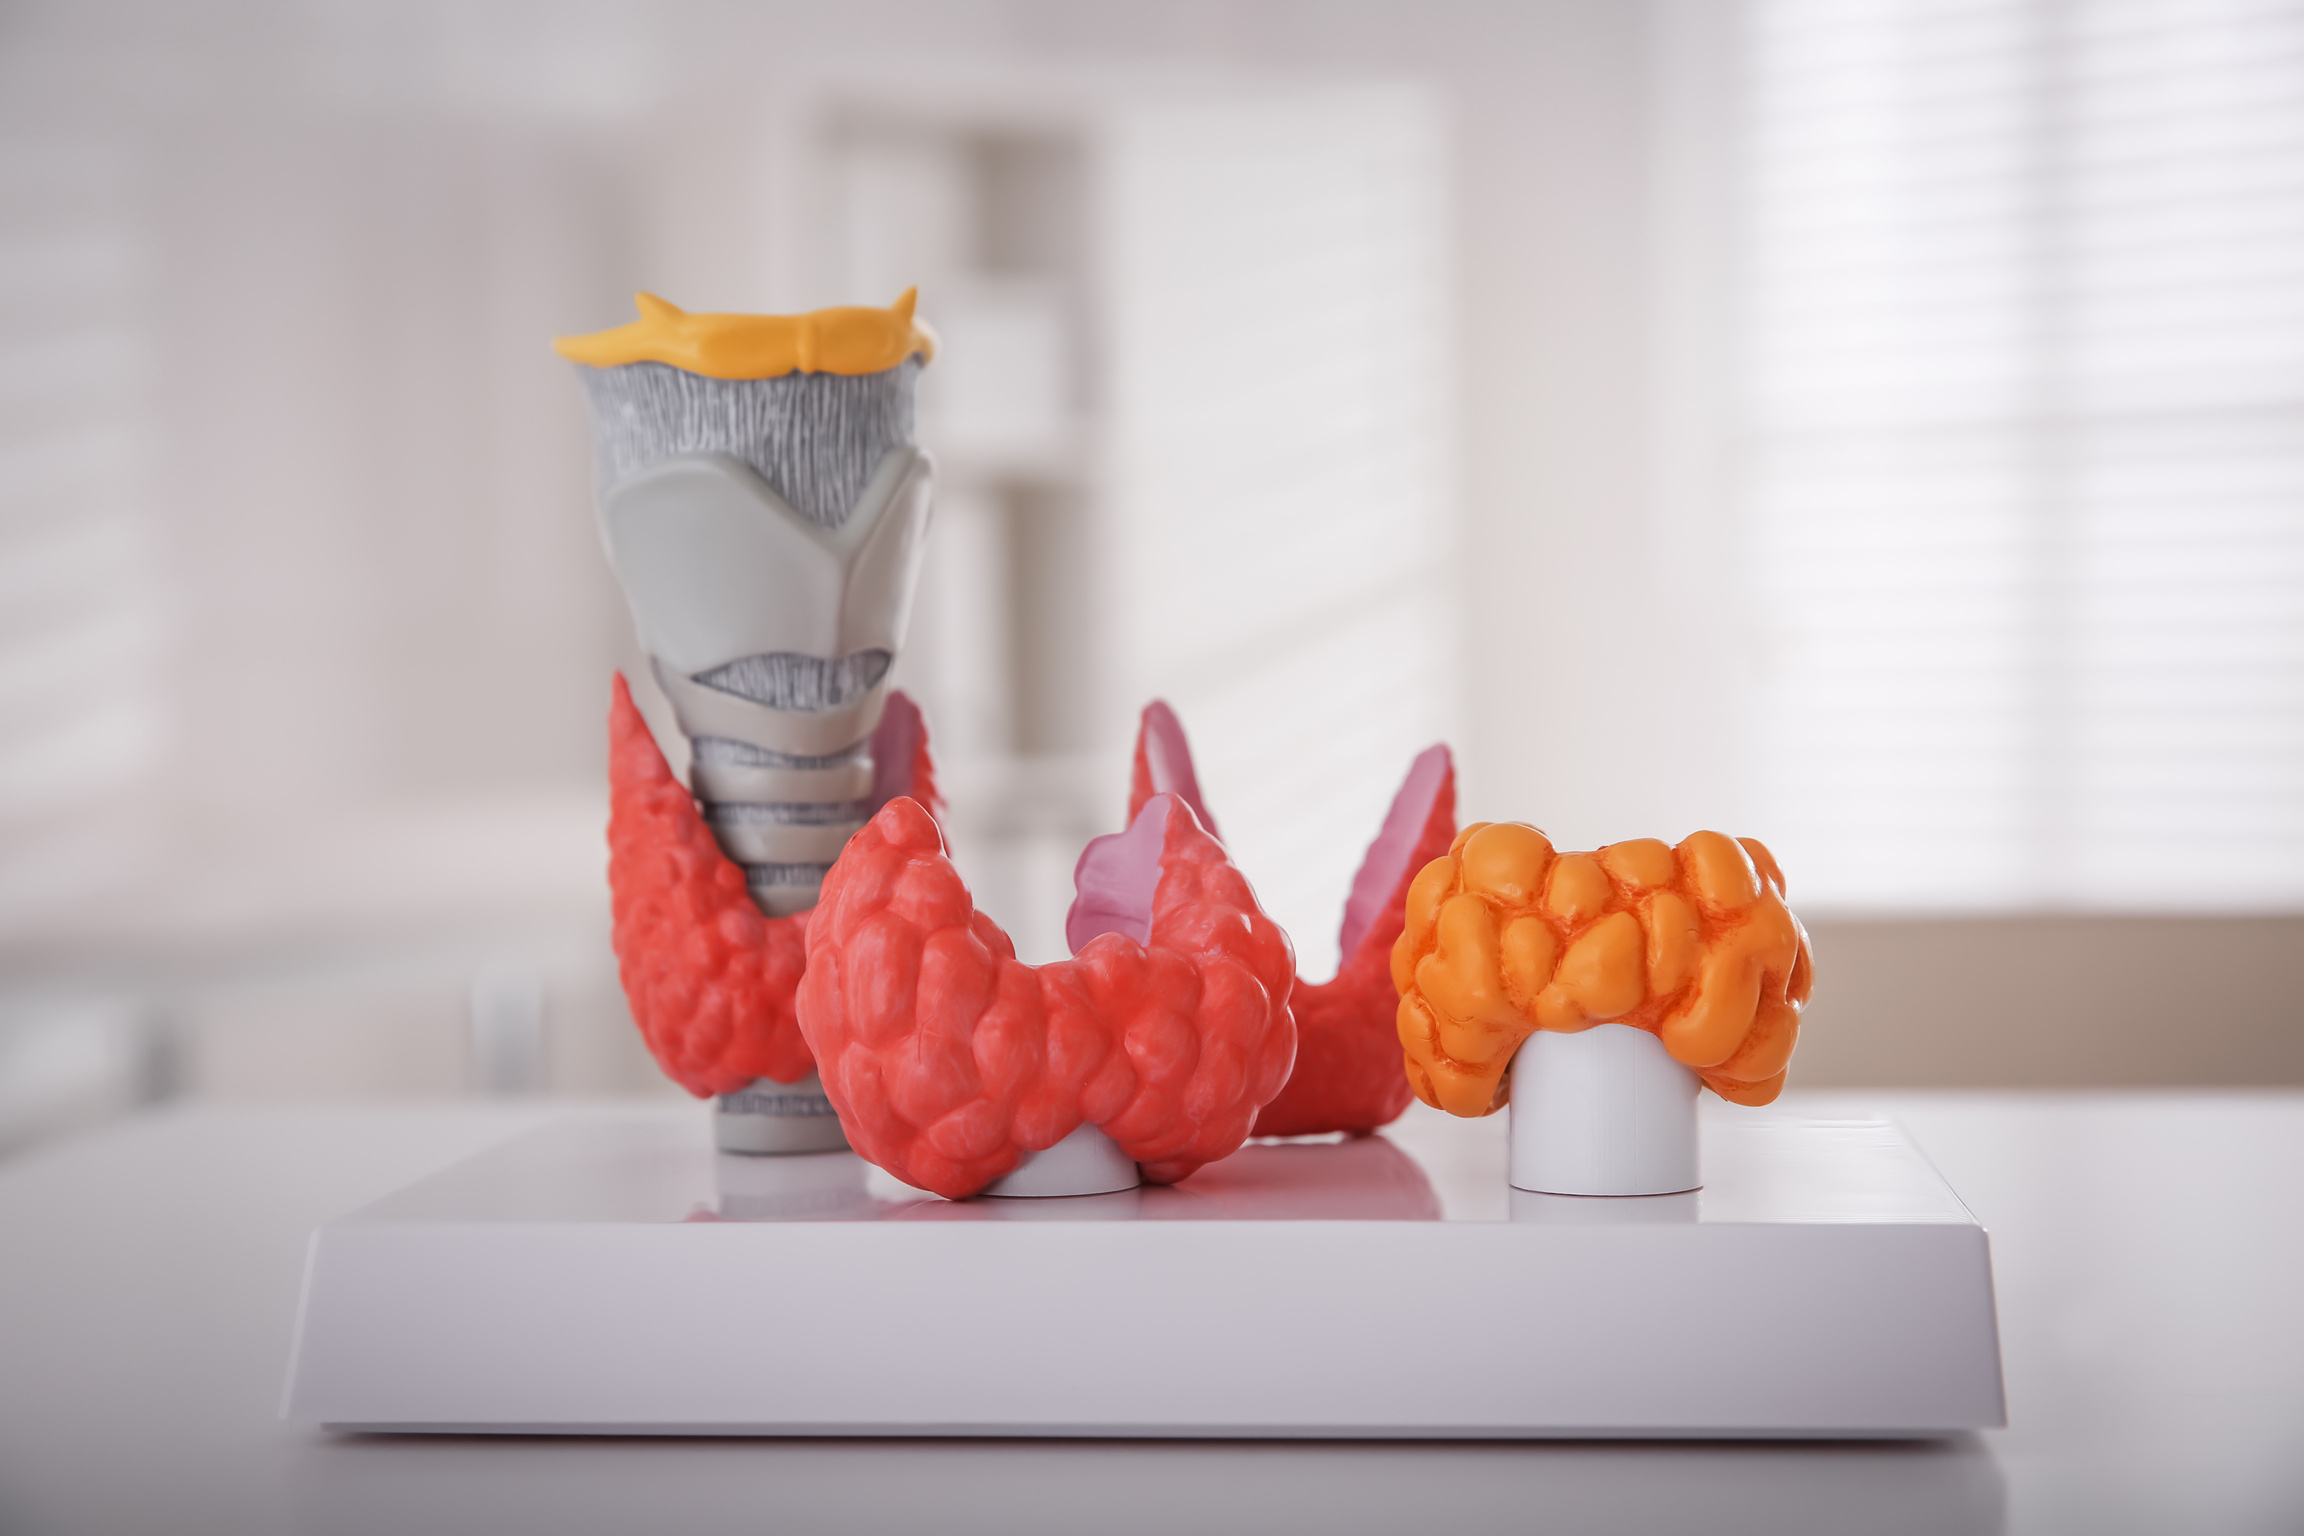 Thyroid Gland Models on White Table in Hospital